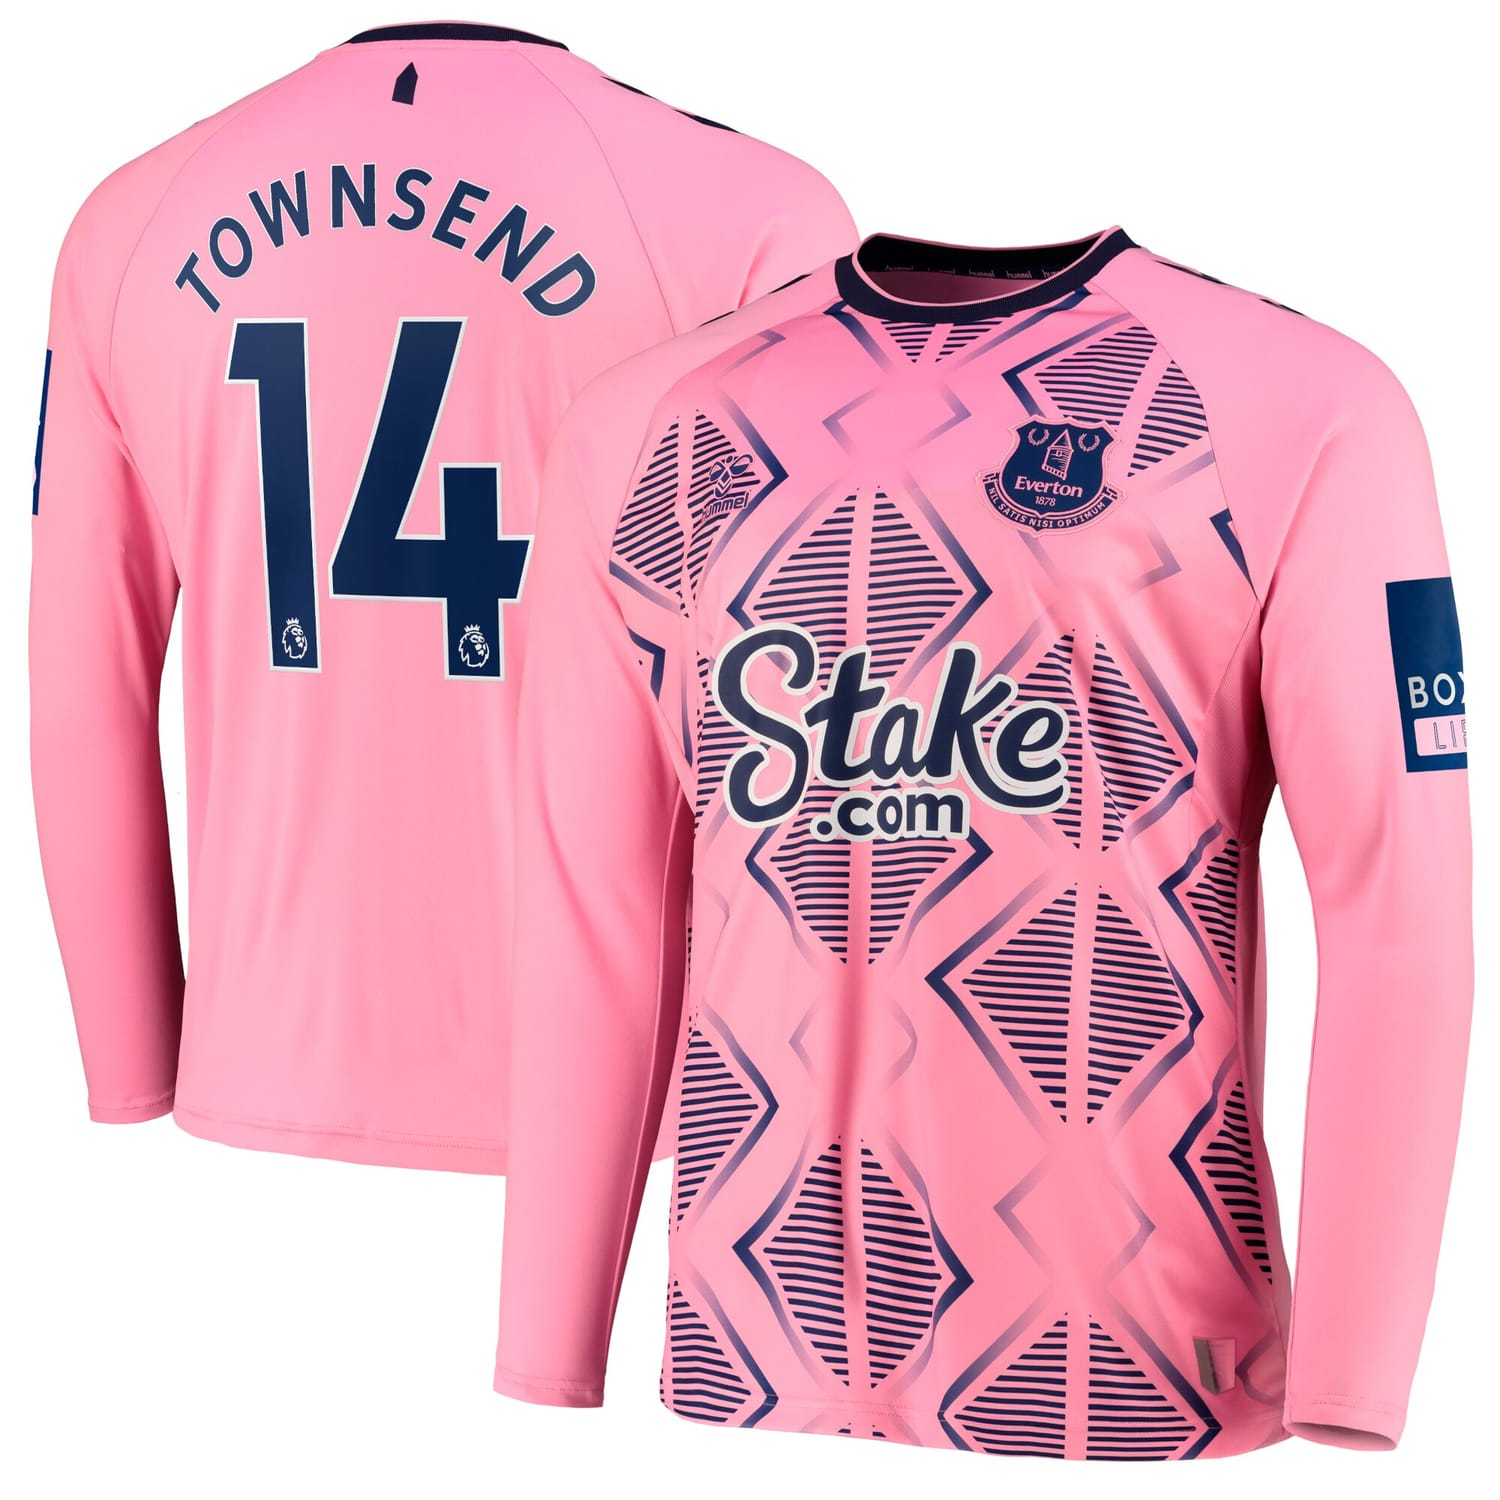 Premier League Everton Away Jersey Shirt Long Sleeve 2022-23 player Andros Townsend 14 printing for Men